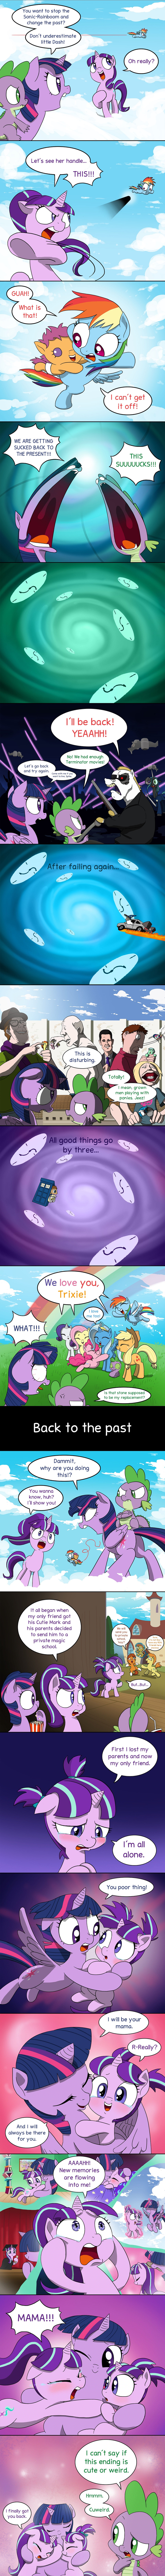 ! 2015 ? absurd_res applejack_(mlp) attack_on_titan back_to_the_future bed blush bonbon_(mlp) brony bulk_biceps_(mlp) car changeling clock comic cute daughter delorean derpy_hooves_(mlp) dialogue digital_media_(artwork) dinky_hooves_(mlp) discord_(mlp) doctor_whooves_(mlp) doublewbrothers dragon earth_pony english_text equine eyewear female feral fire fluttershy_(mlp) forced_kiss friendship_is_magic glowing graduation gun happy_ending hi_res horn horse hug human laser levitation lyra_heartstrings_(mlp) macro magic male mammal mother mother_and_daughter my_little_pony octavia_(mlp) orphan parent parody pegasus pinkie_pie_(mlp) pony queen_chrysalis_(mlp) rainbow rainbow_dash_(mlp) ranged_weapon rarity_(mlp) rock scootaloo_(mlp) shotgun sparkles spike_(mlp) spitfire_(mlp) starlight_glimmer_(mlp) starswirl_the_bearded_(mlp) sunburst_(mlp) sunglasses superabsurd_res t1000 tears terminator text time_travel trixie_(mlp) twilight_sparkle_(mlp) unicorn vehicle vinyl_scratch_(mlp) weapon winged_unicorn wings wonderbolts_(mlp) young